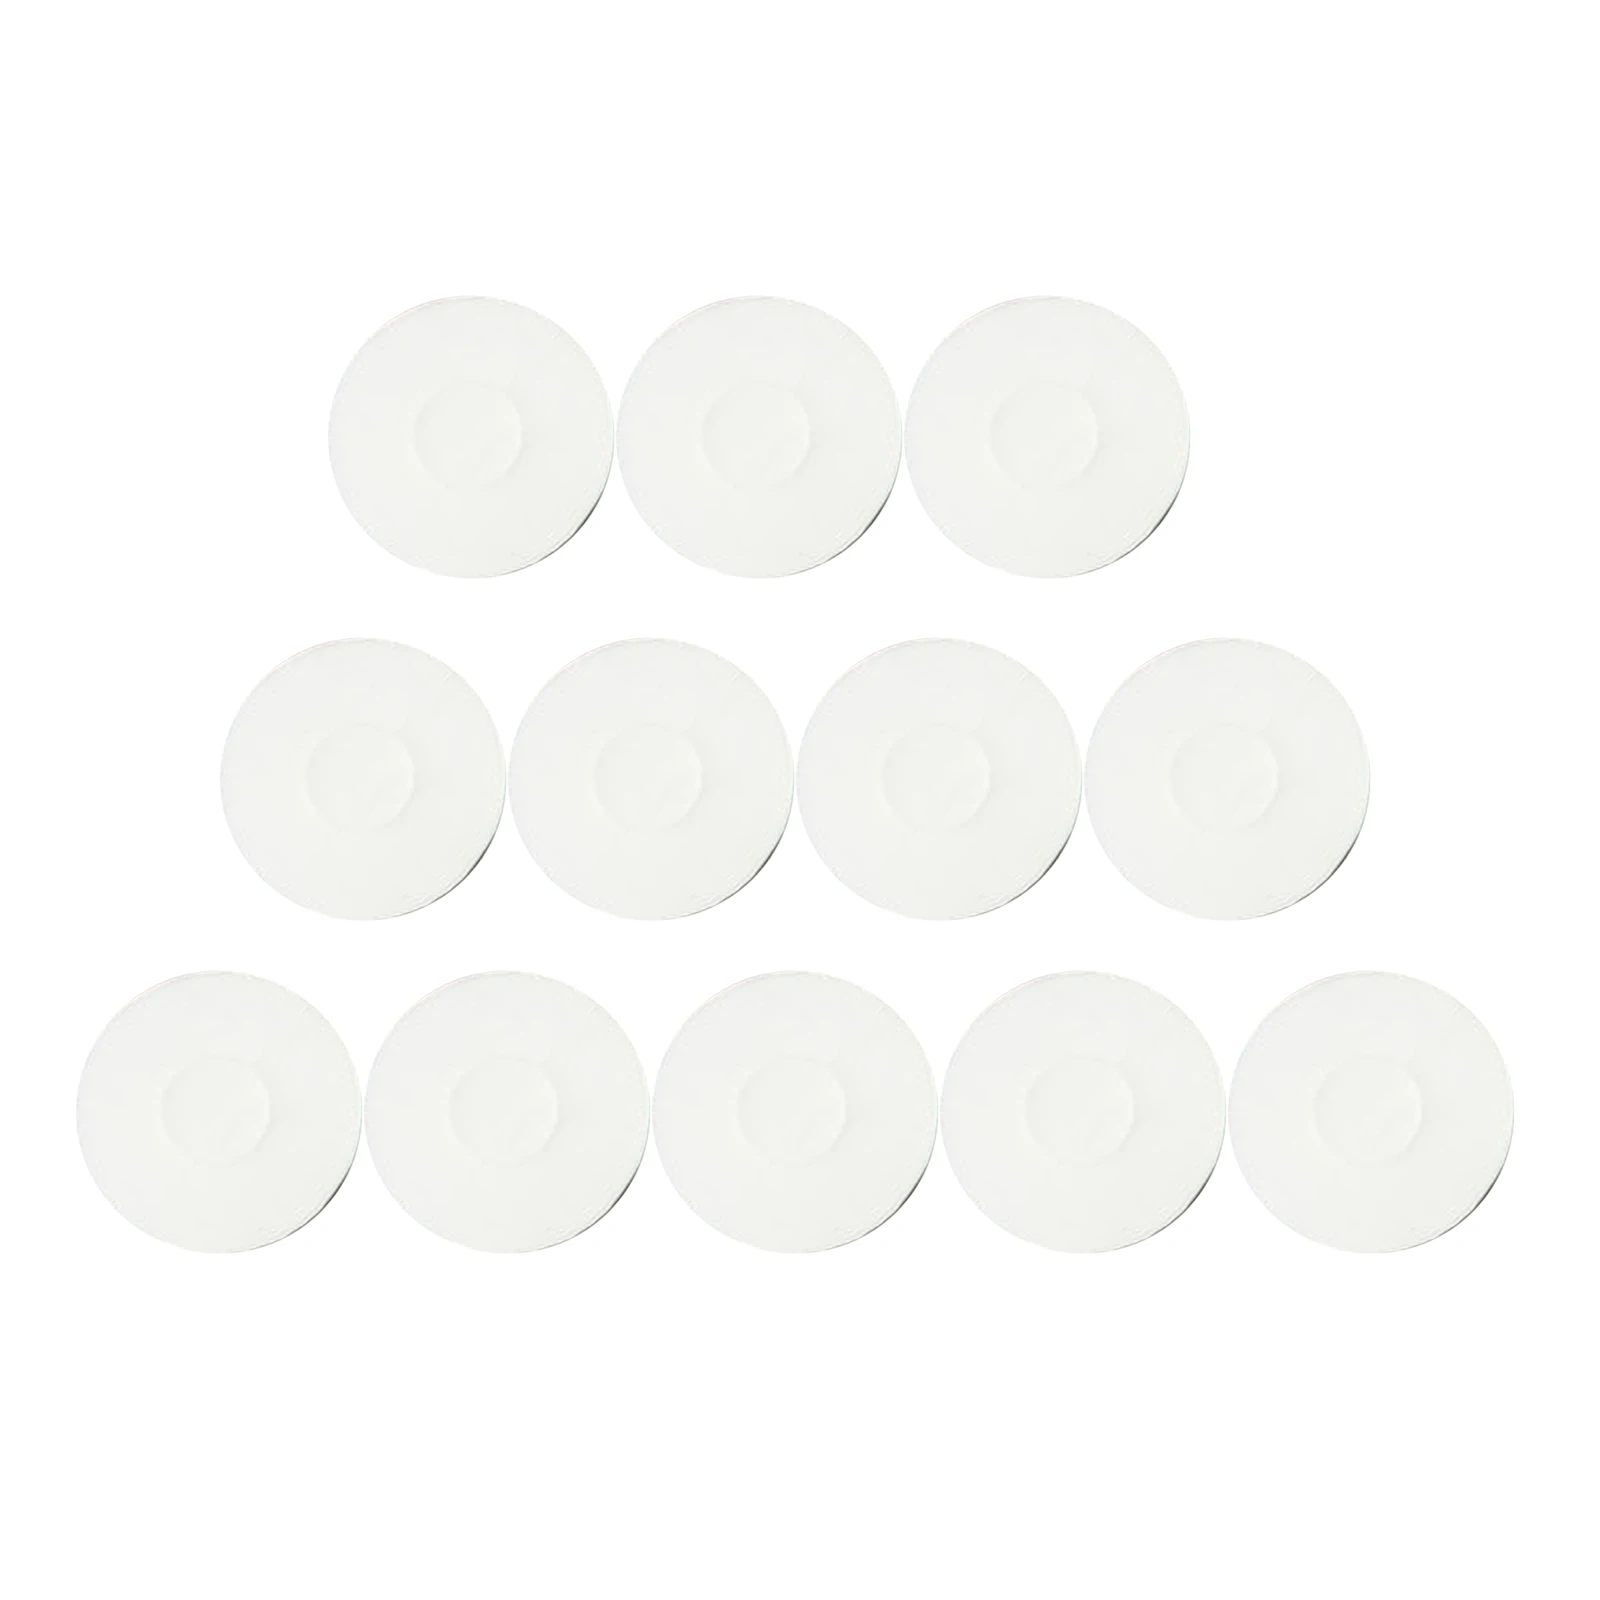 12Pcs Clear Bike French Presta Valve Sticker Rim Protection Bicycle Pad Tube Tire Gasket Repair Mountain Road Accessories